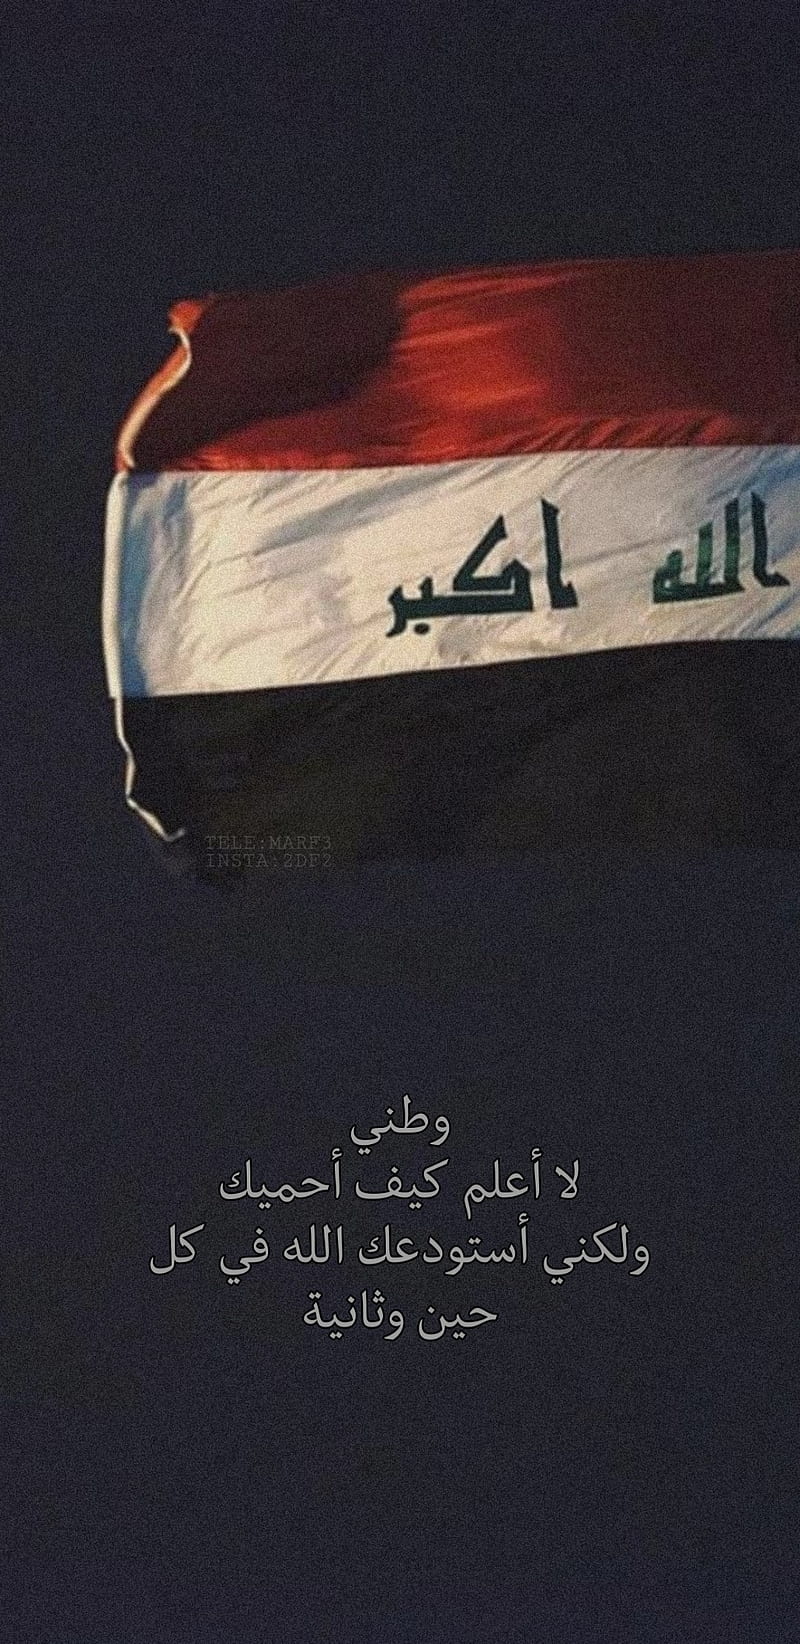 IRAQ IS MY COUNTRY, countryman, HD phone wallpaper